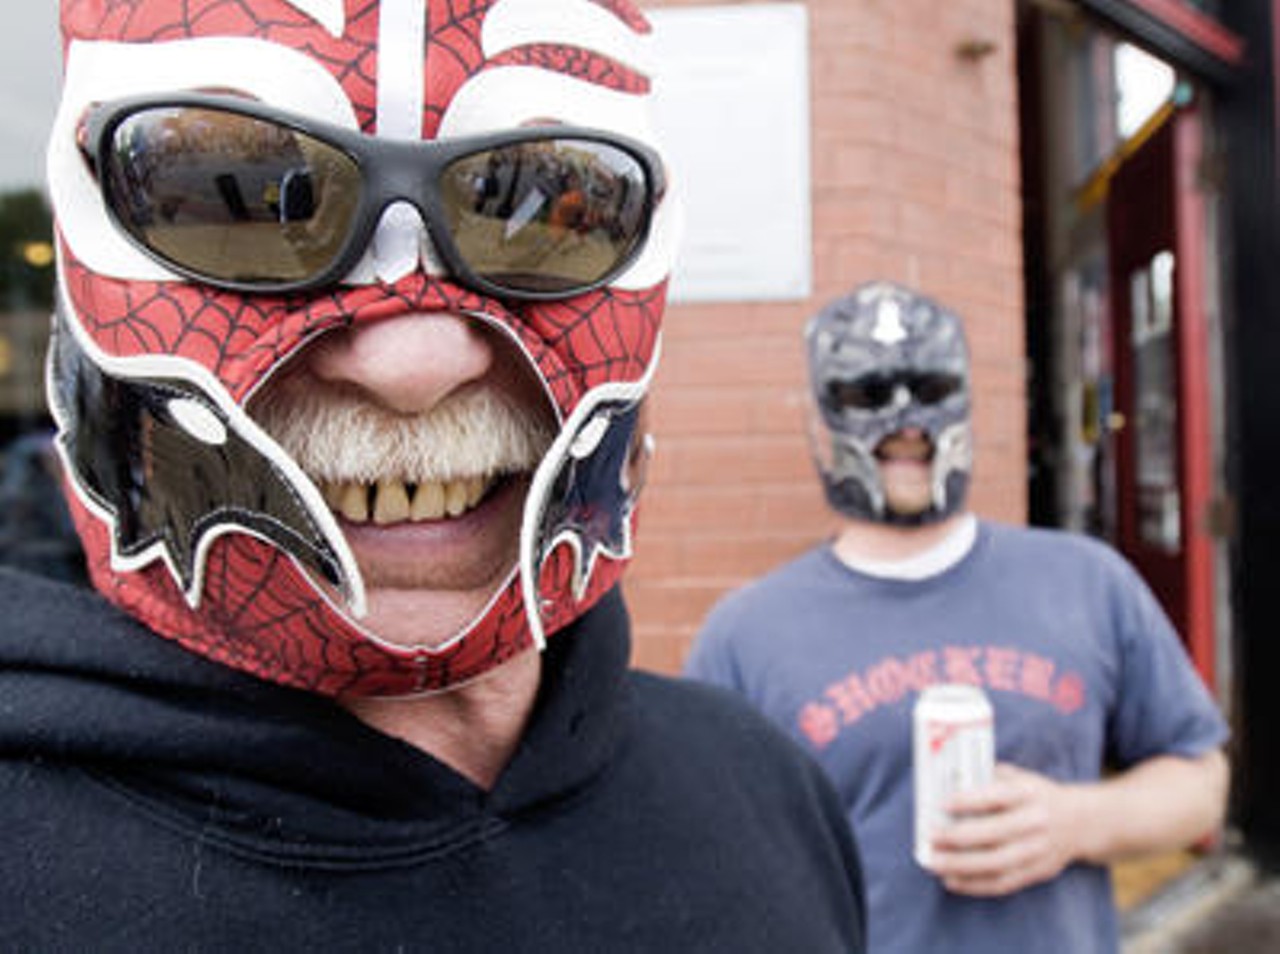 The scene from Cherokee Street, St. Louis' most popular Mexican community, on May 2, for a weekend version of the Cinco de Mayo celebration. More photos.